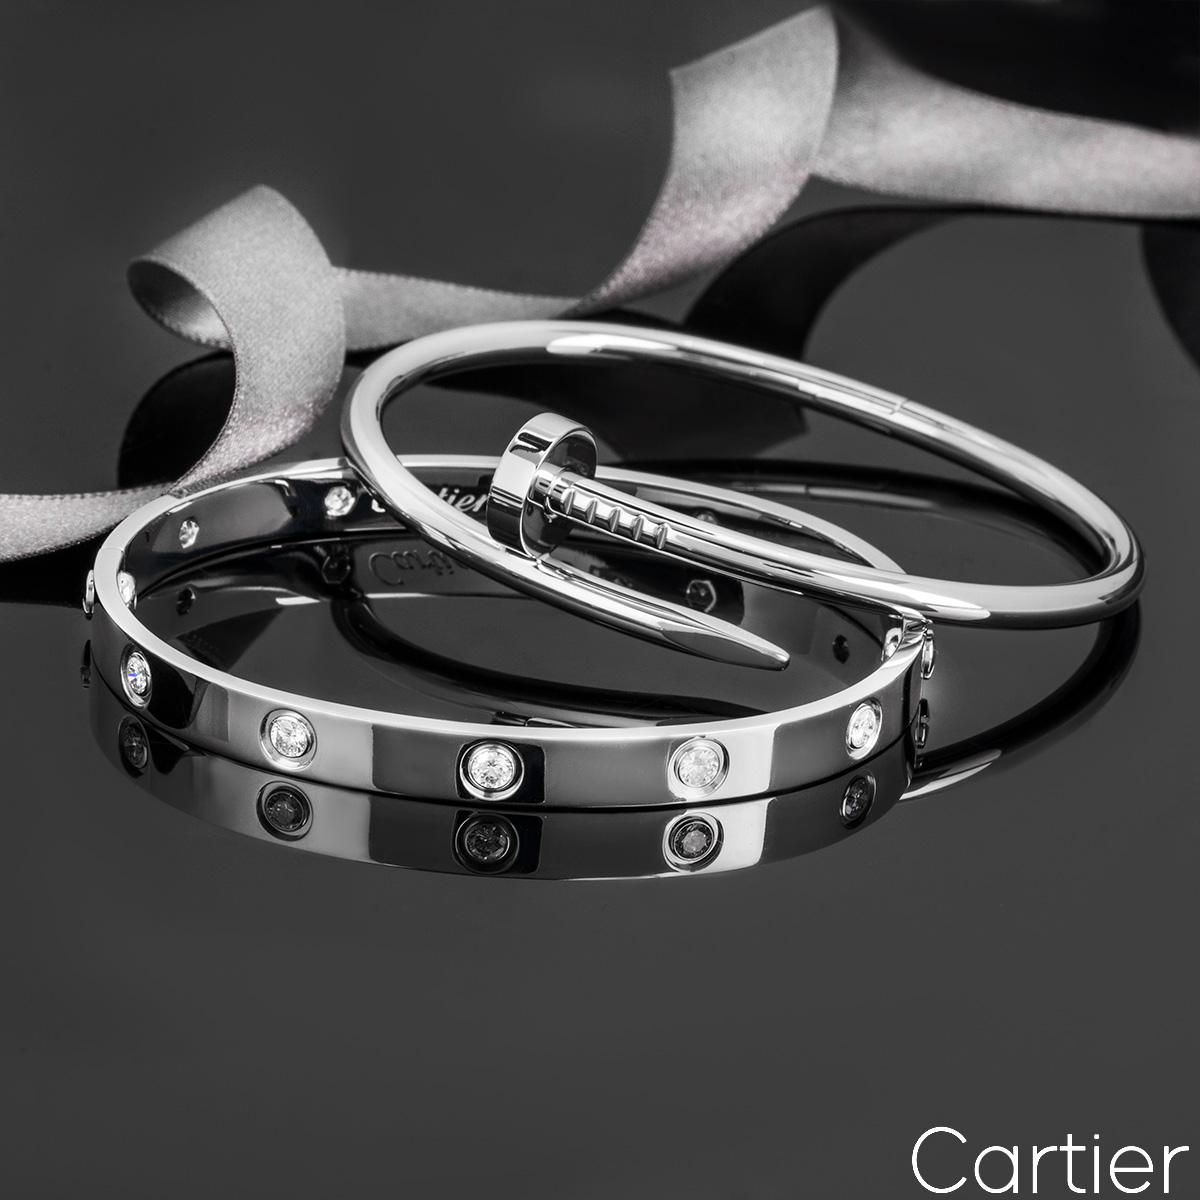 Cartier White Gold Full Diamond Love Bracelet Size 18 B6040718 In Excellent Condition For Sale In London, GB